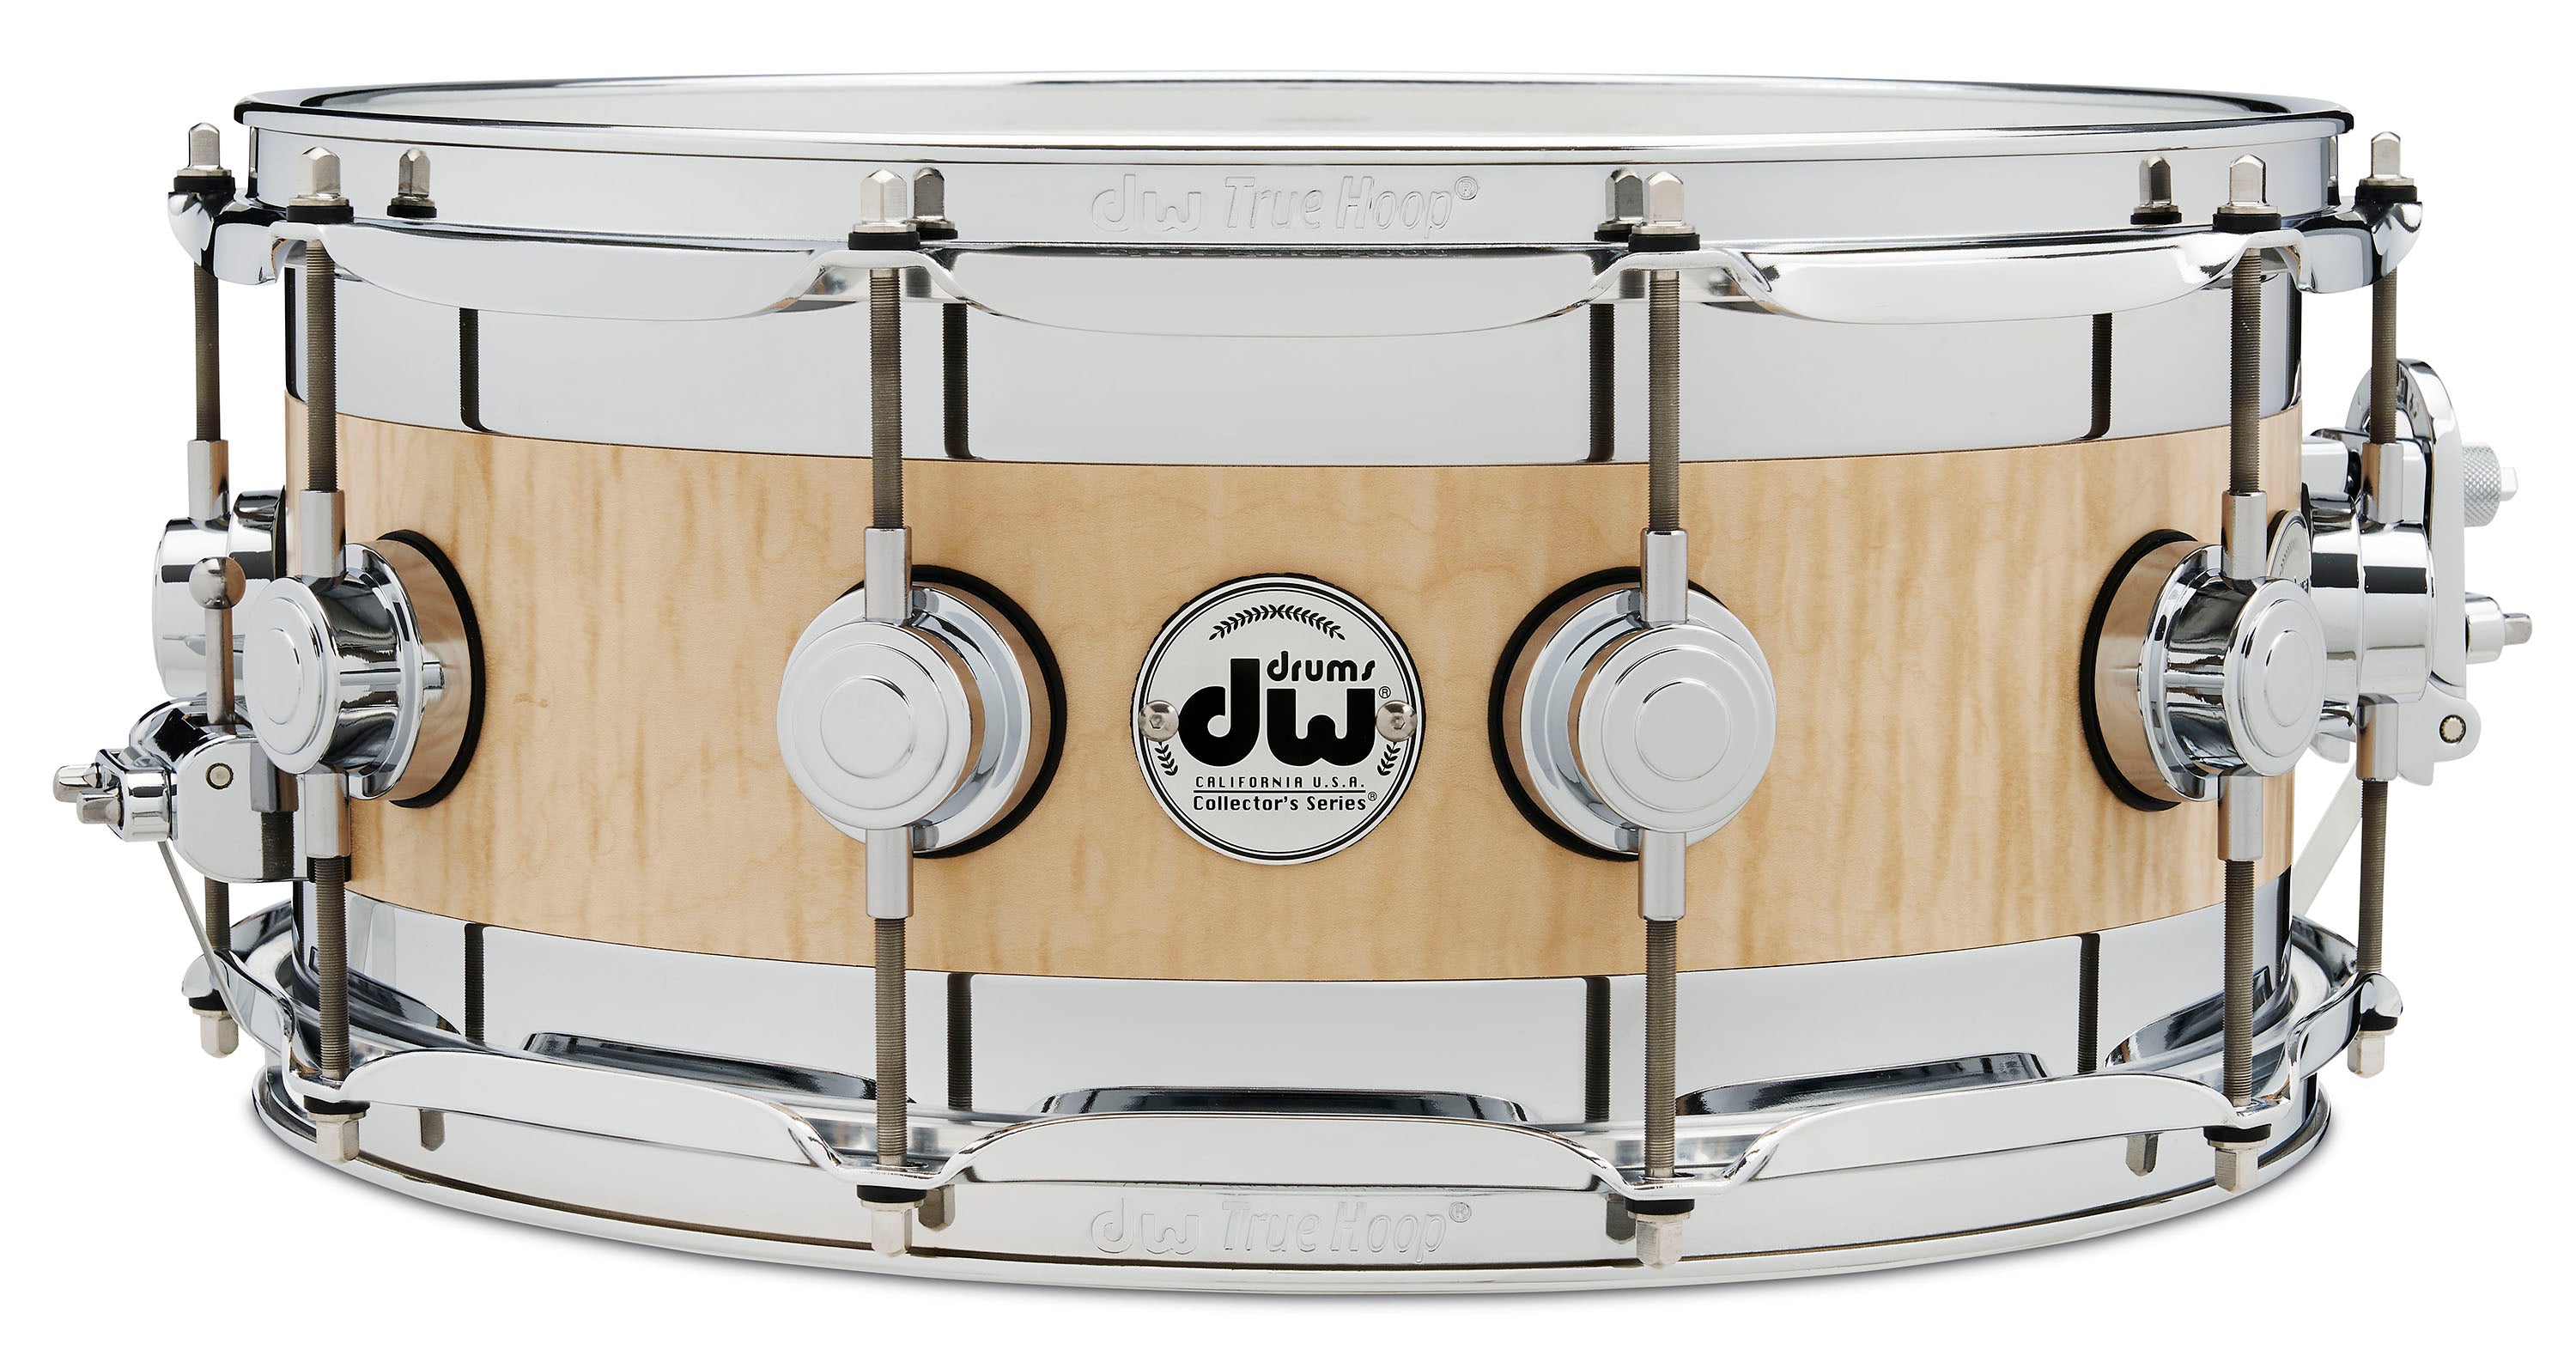 Collector's Series Edge Snare | Drum Workshop Inc.